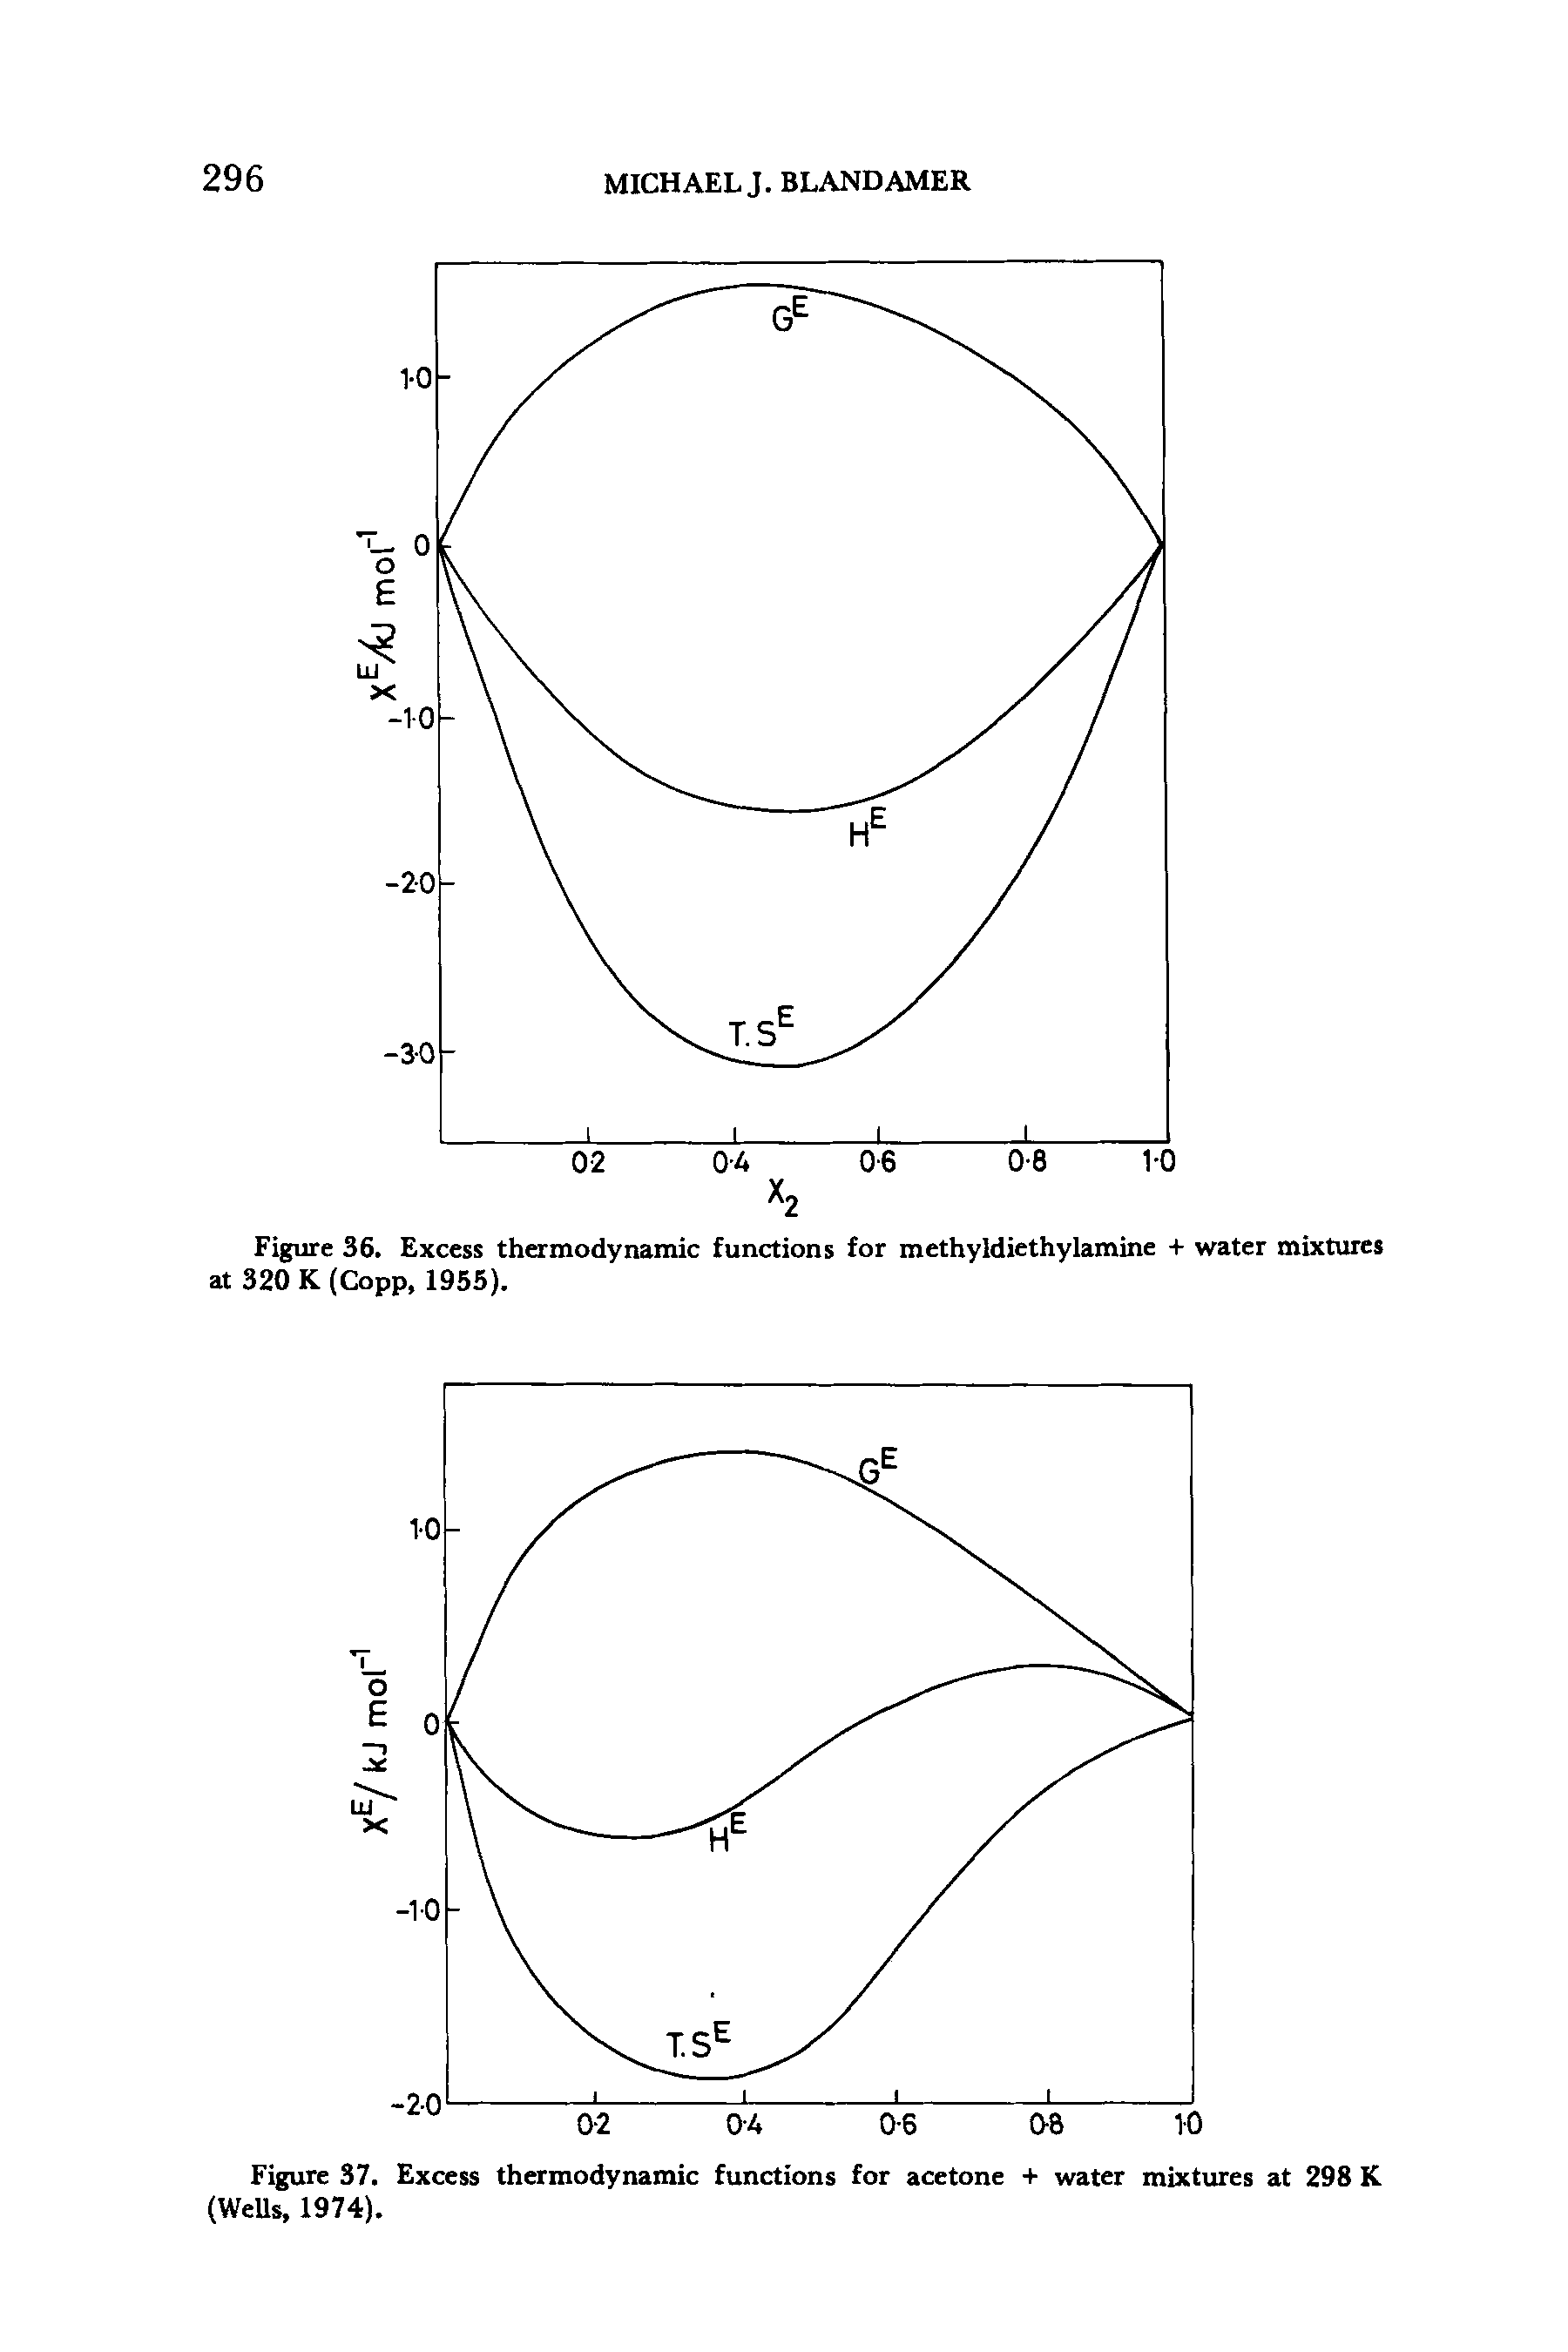 Figure 37. Excess thermodynamic functions for acetone + water mixtures at 298 K (Wells, 1974).